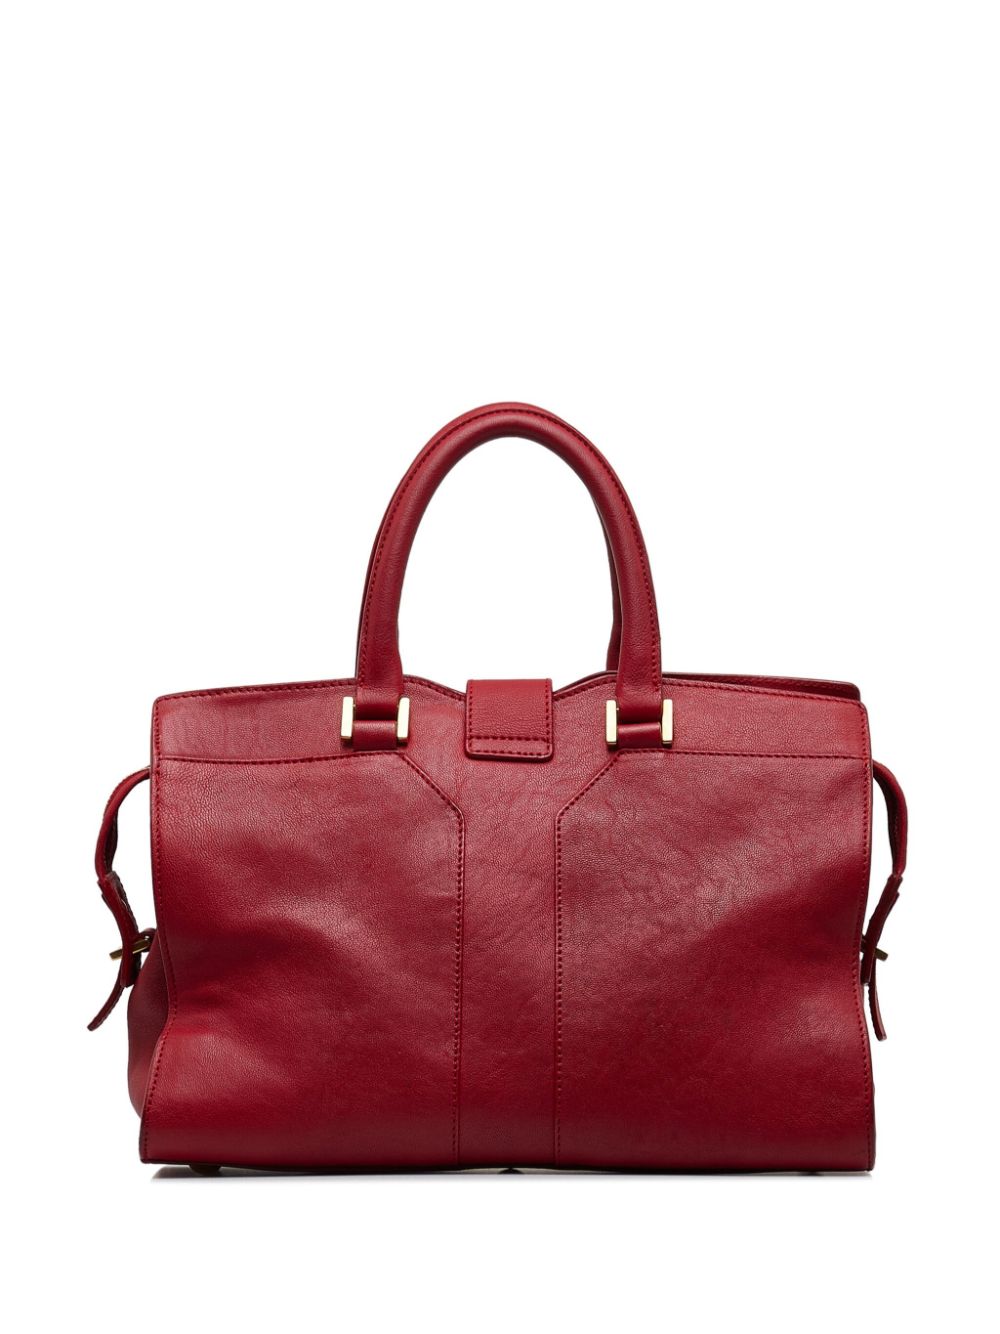 Saint Laurent Pre-Owned 2015 Cabas Chyc two-way handbag - Rood